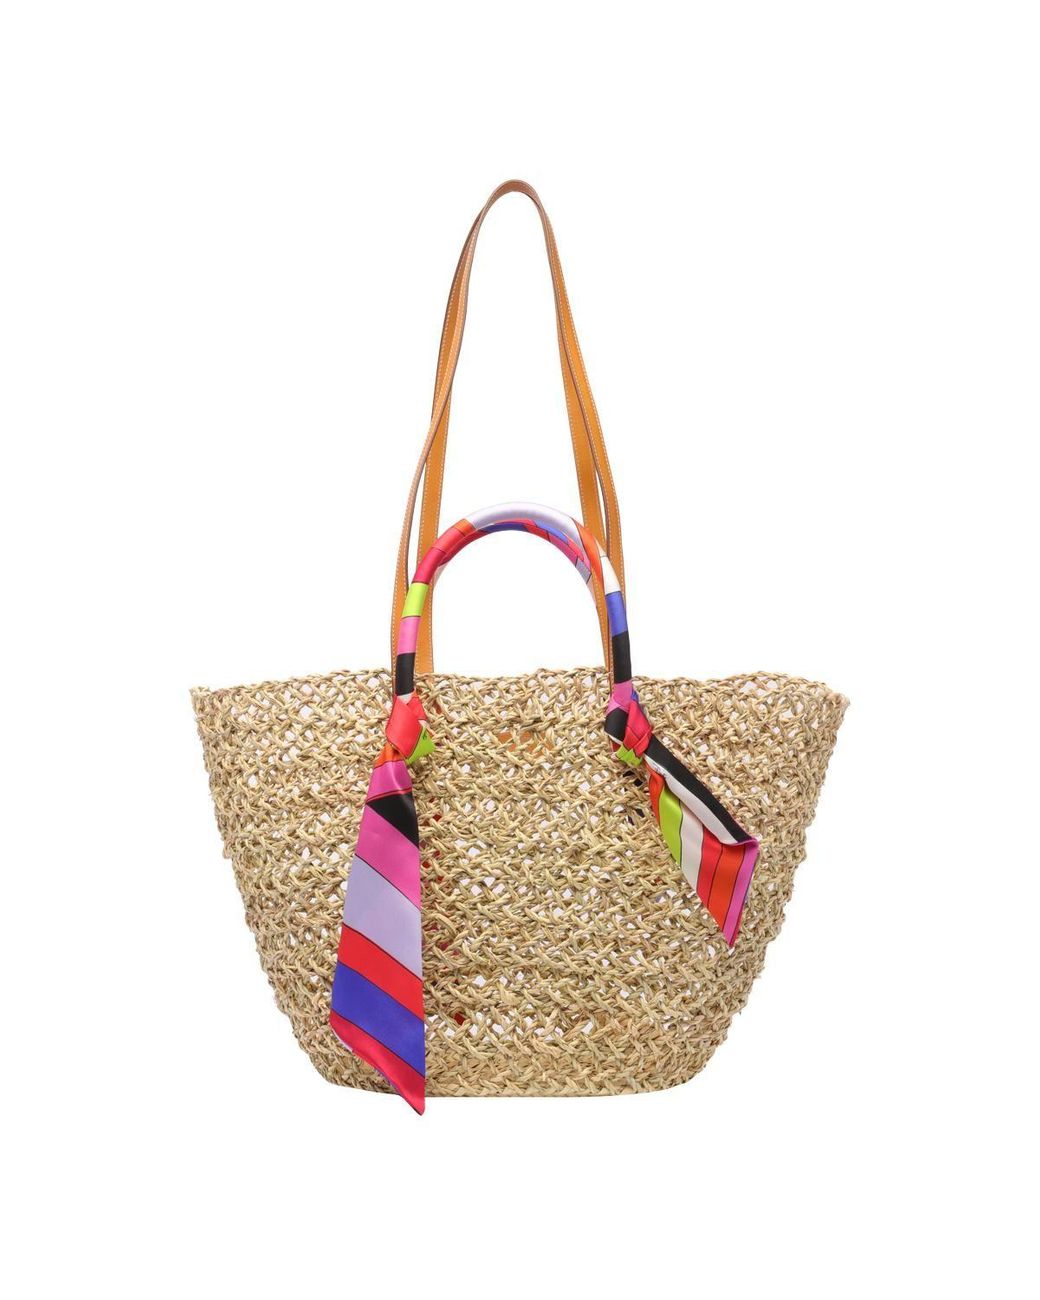 Leather Trimmed Straw Tote in Beige - Pucci